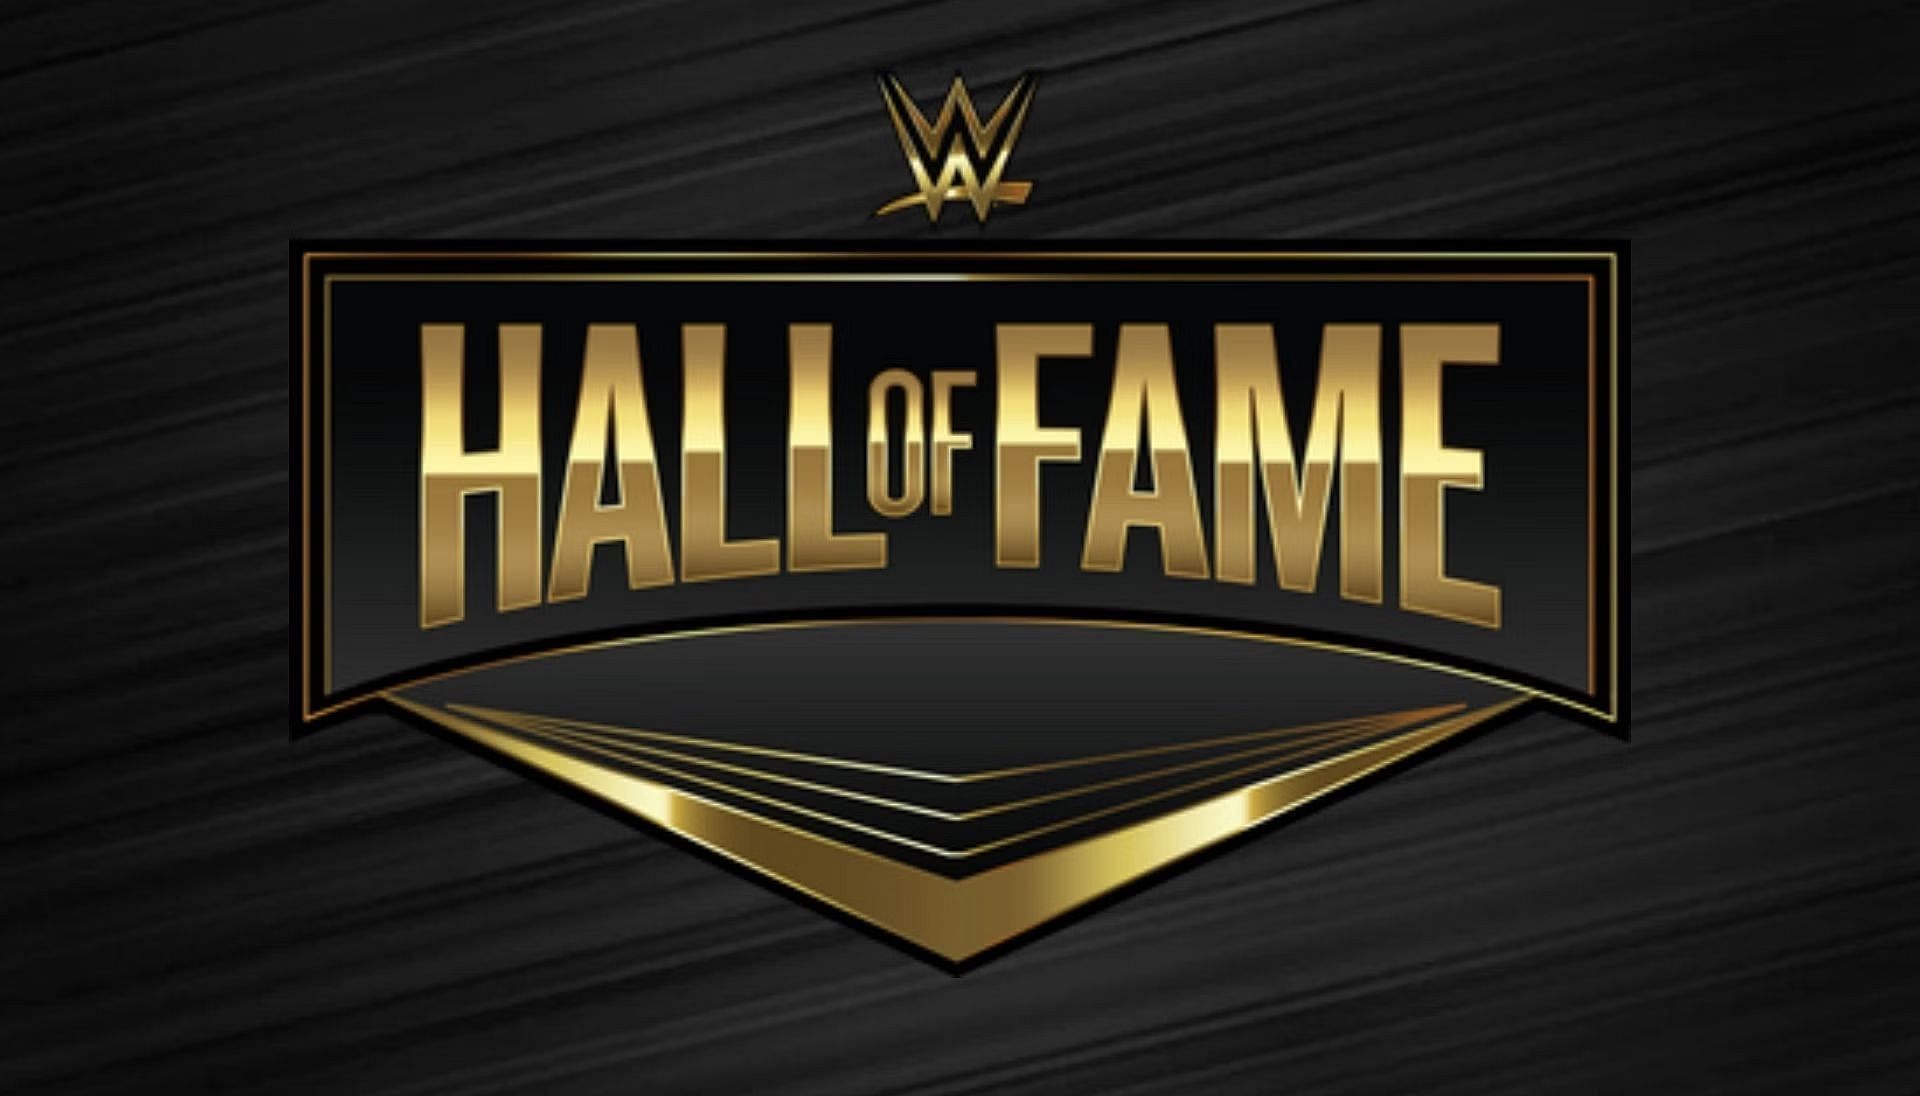 The WWE Hall of Fame is set to go down on Friday March 31st.